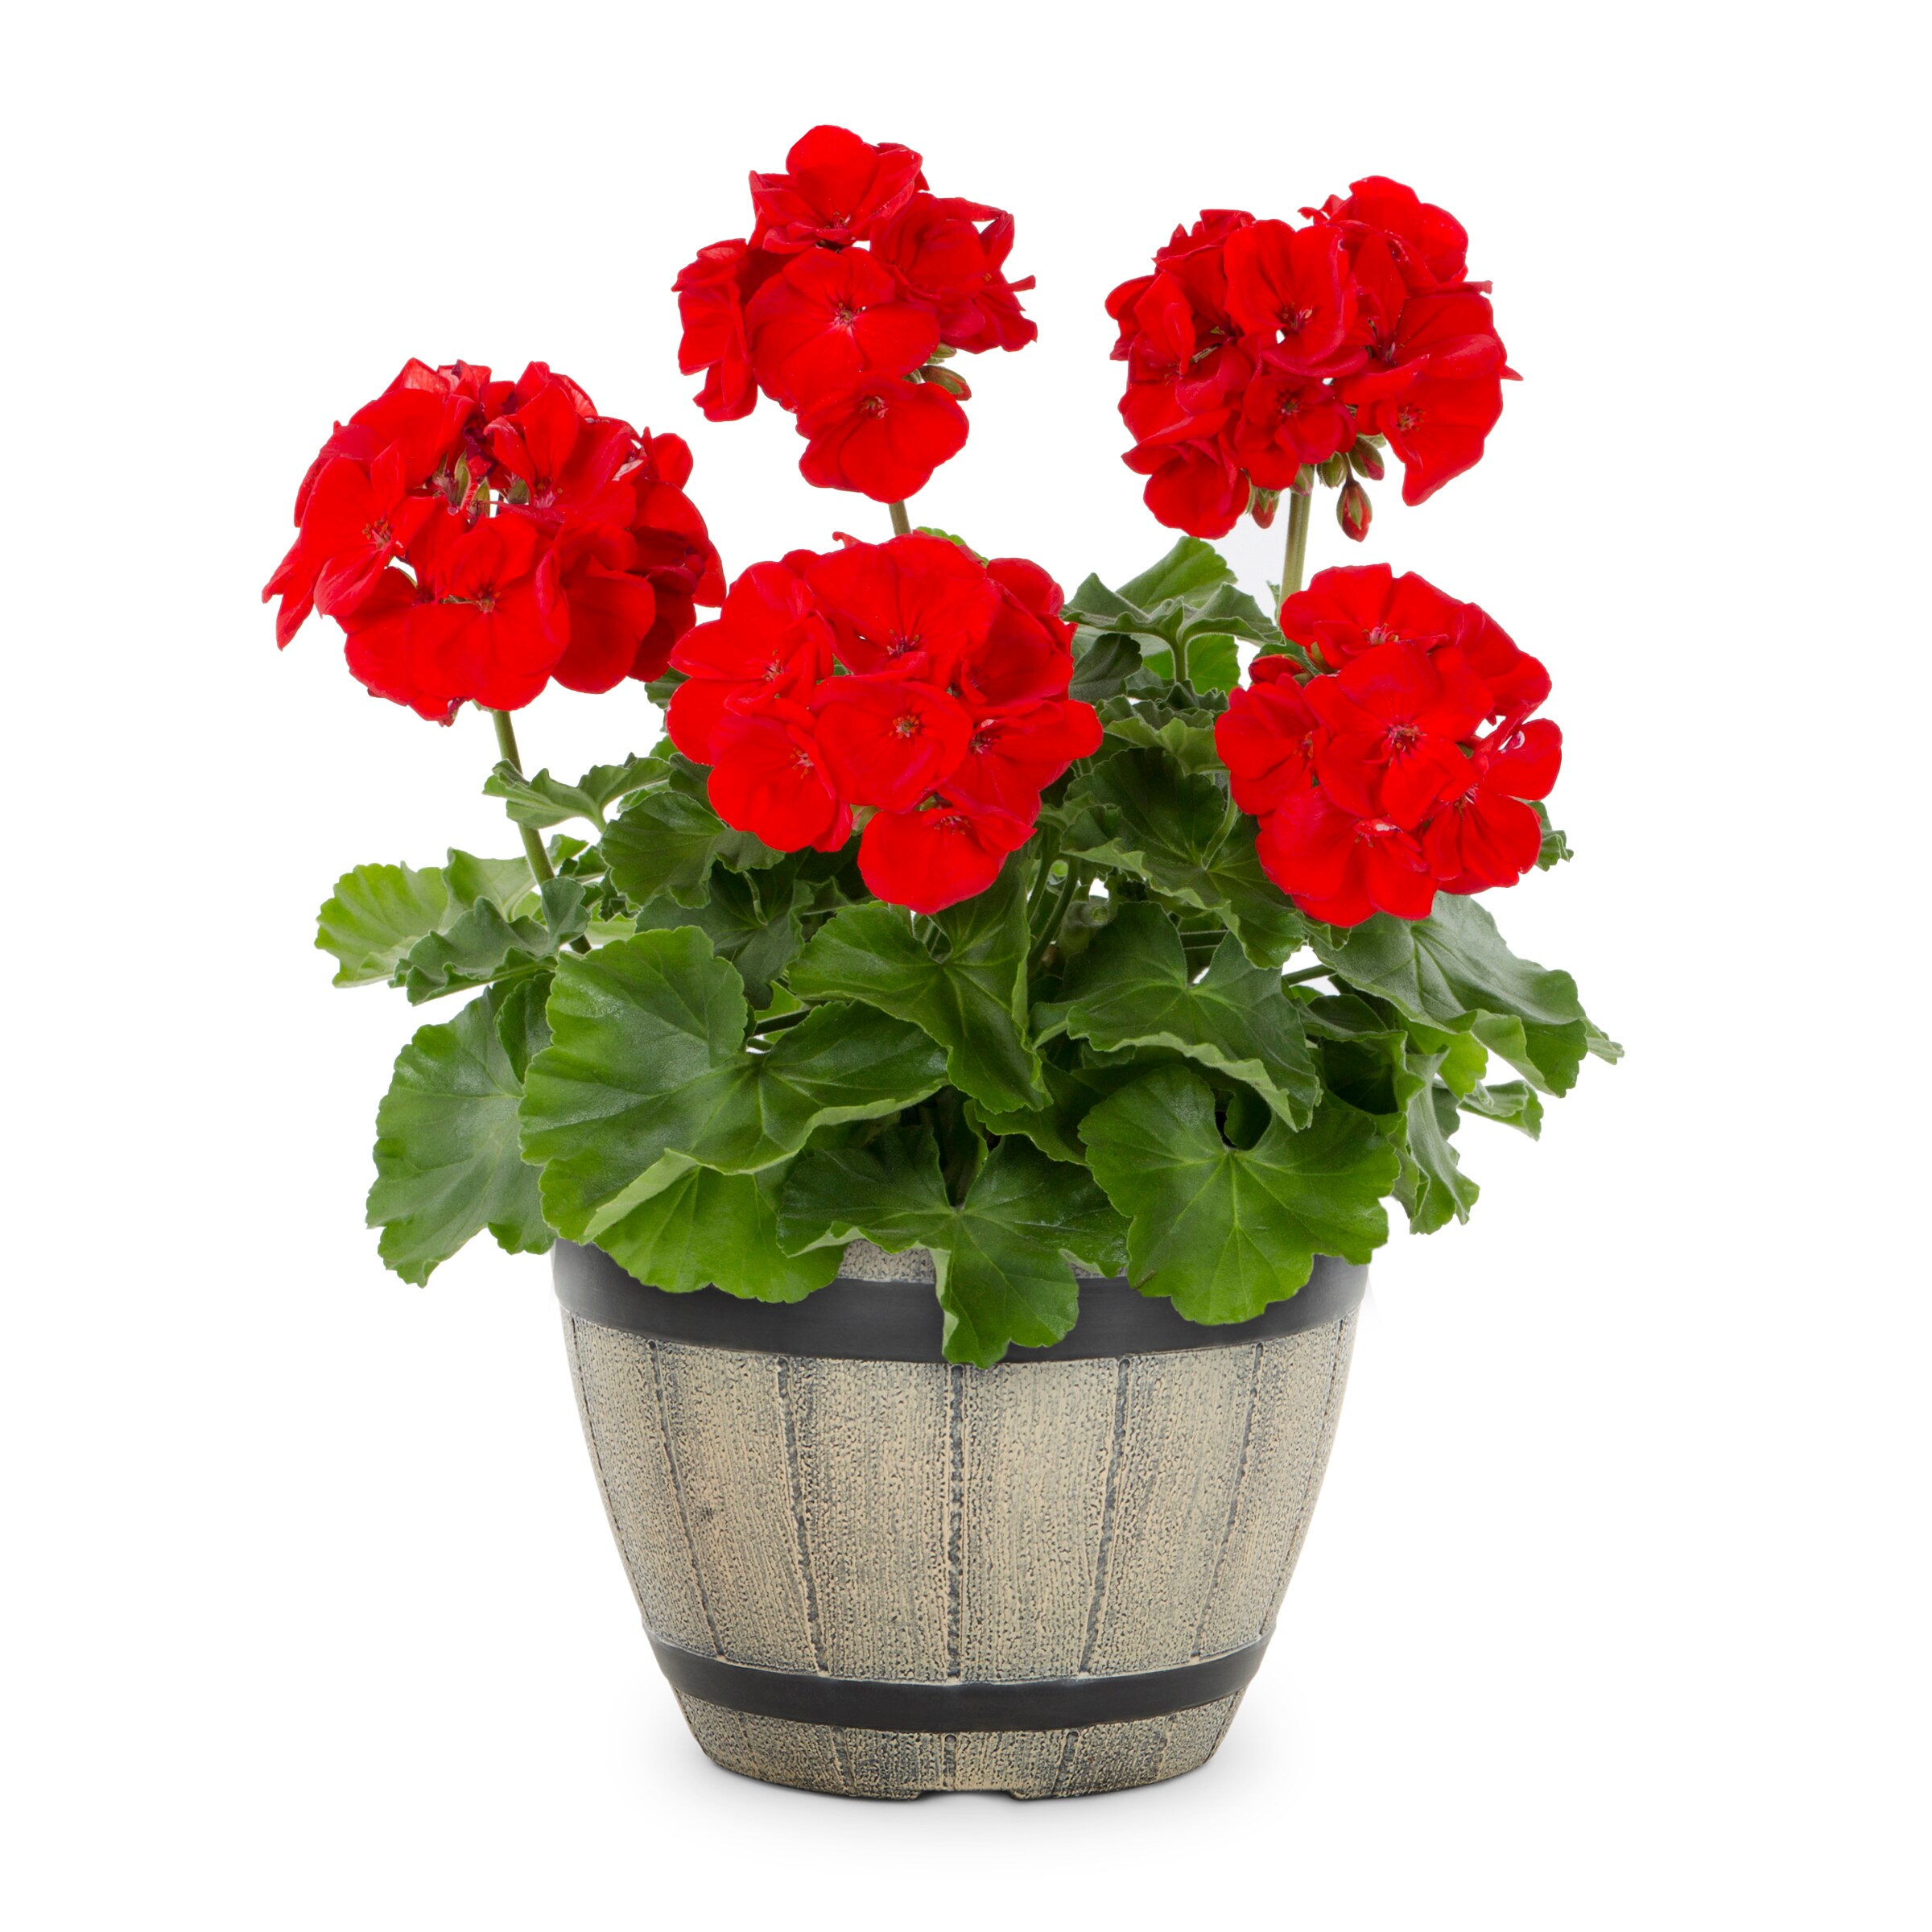 Lowe's Multicolor Mixed Annuals Combinations in 3-Quart Planter in the ...